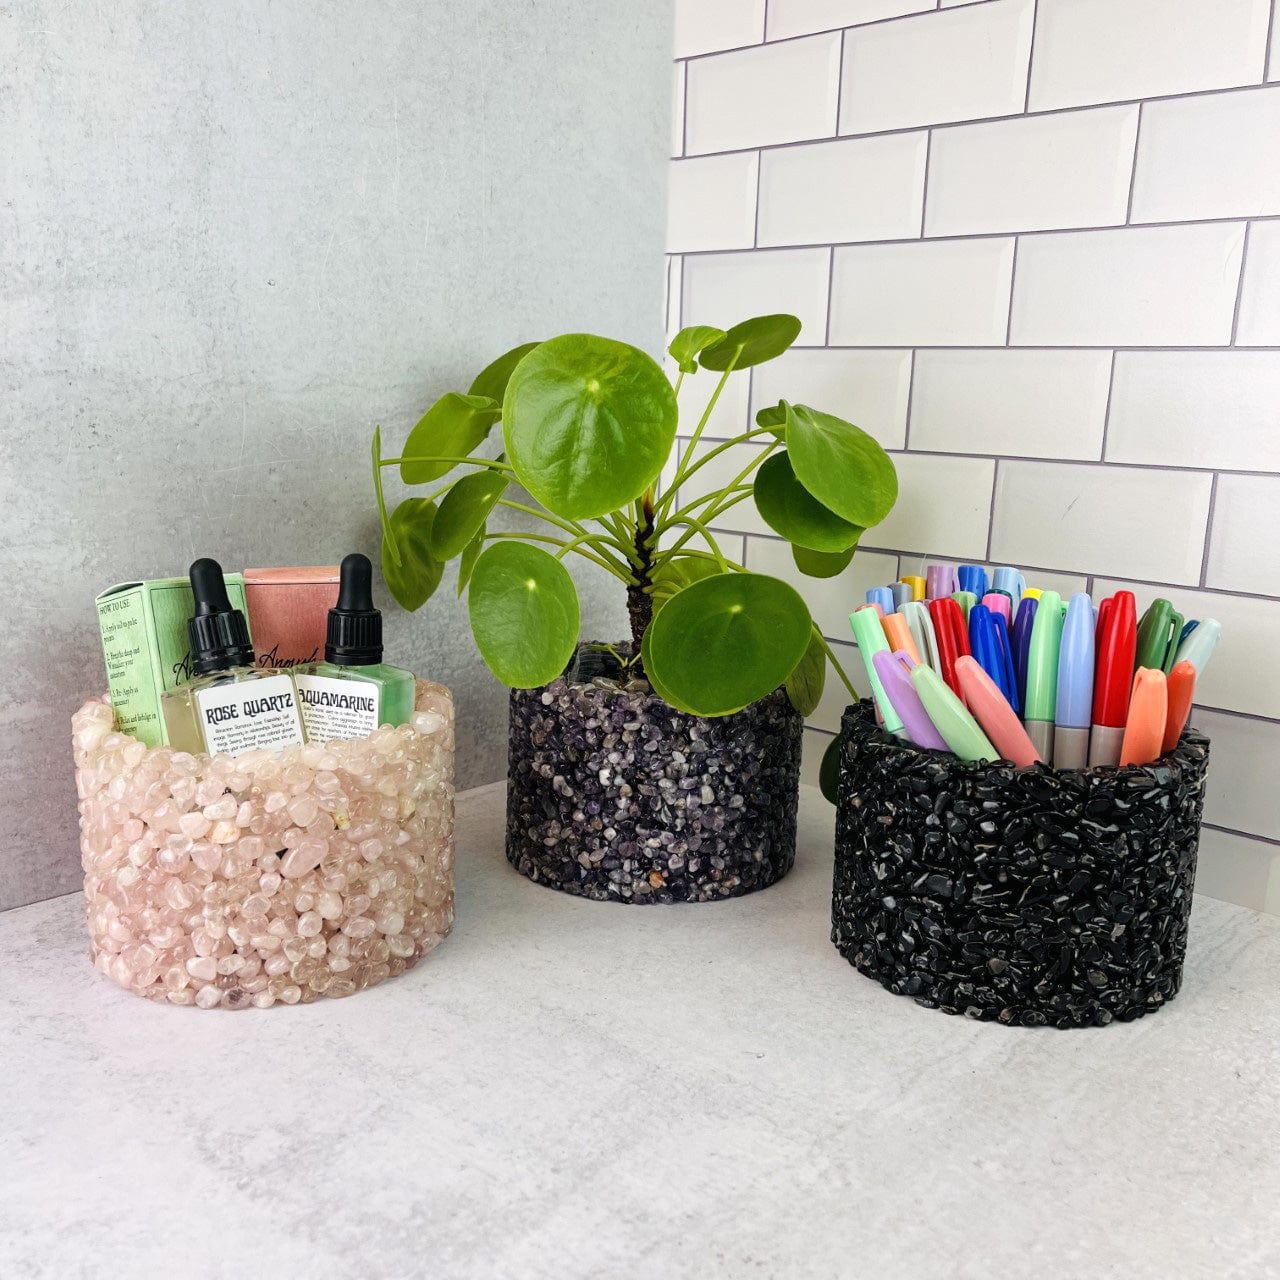 3 Tumbled Stone Pot/Holders #4, shown here holding a plant, oils bottles, pens